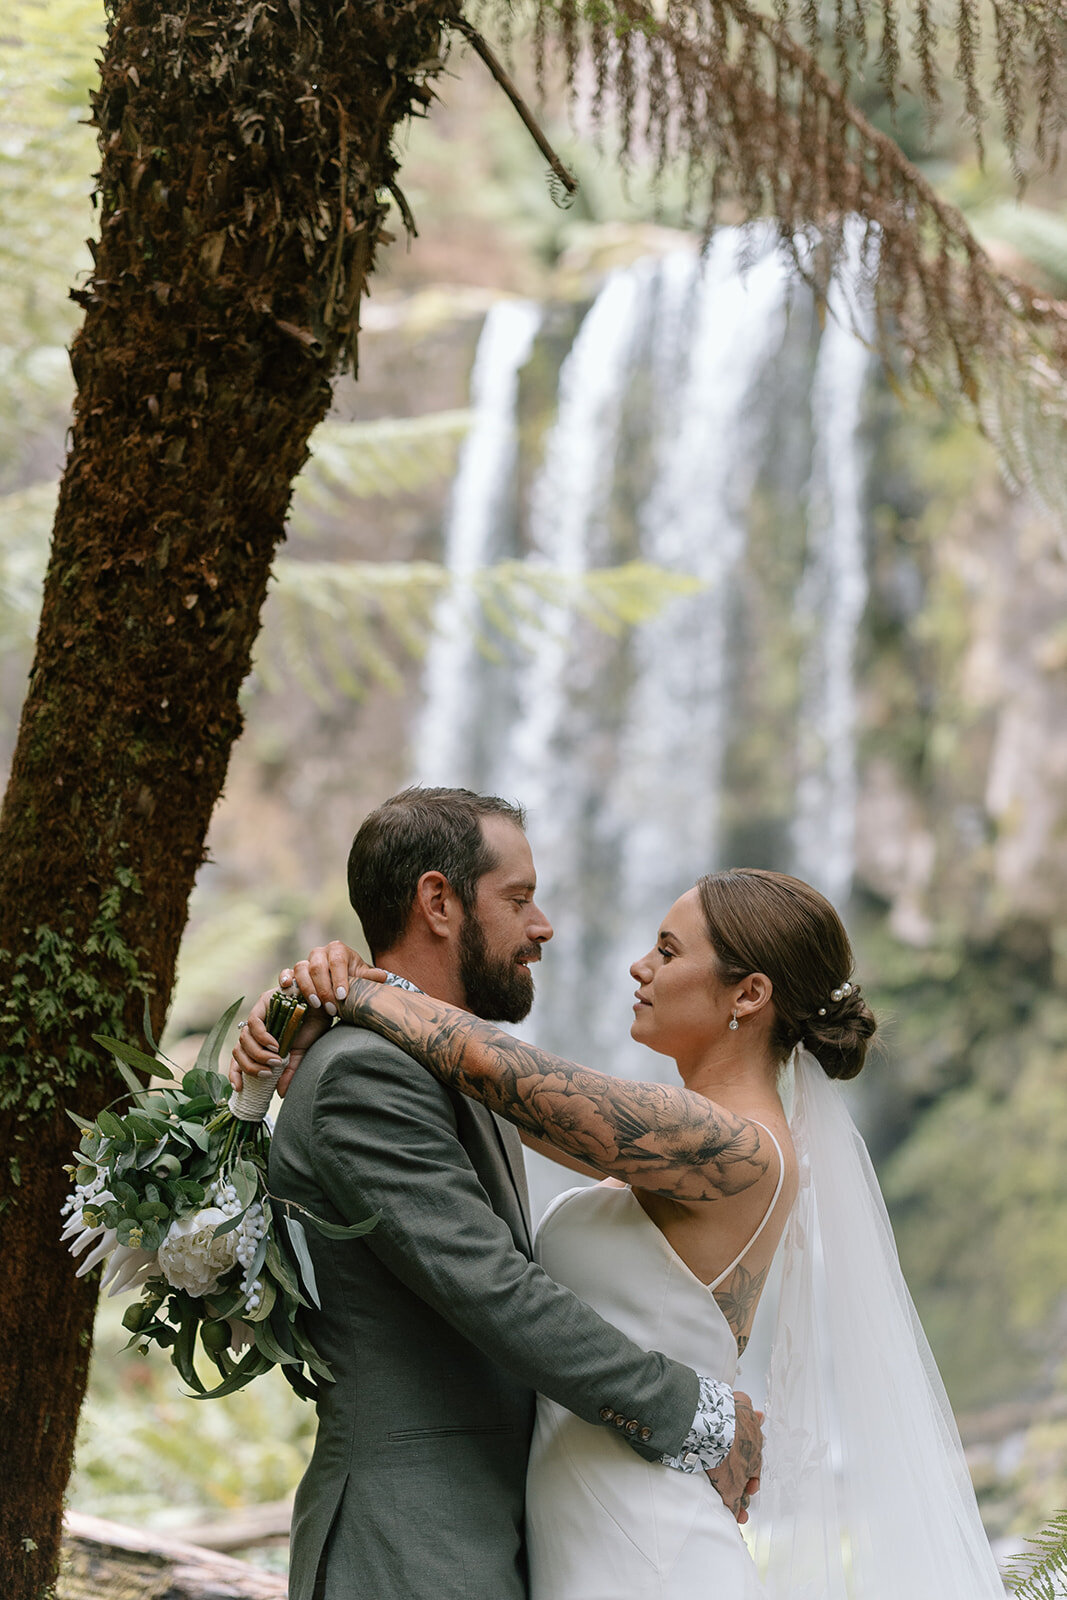 Stacey&Cory-Coast&Pines-298